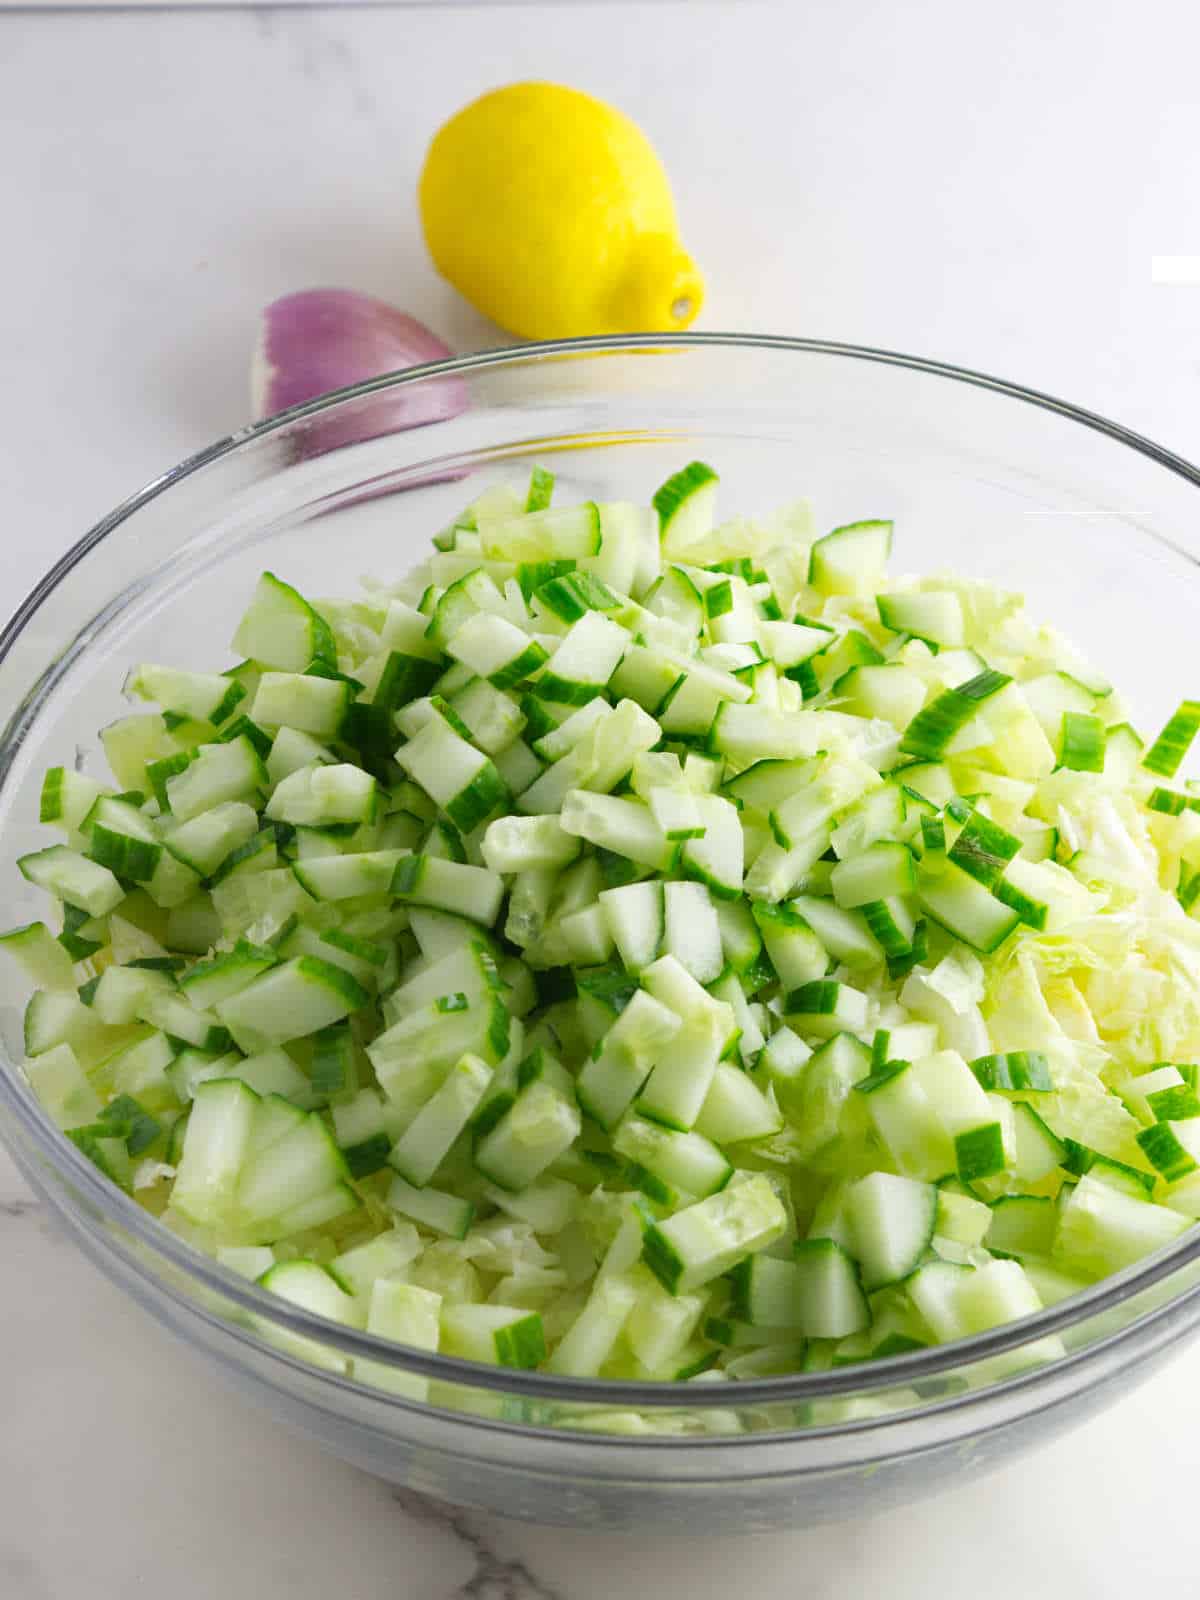 chopped cabbage and cucumber in a large bowl.